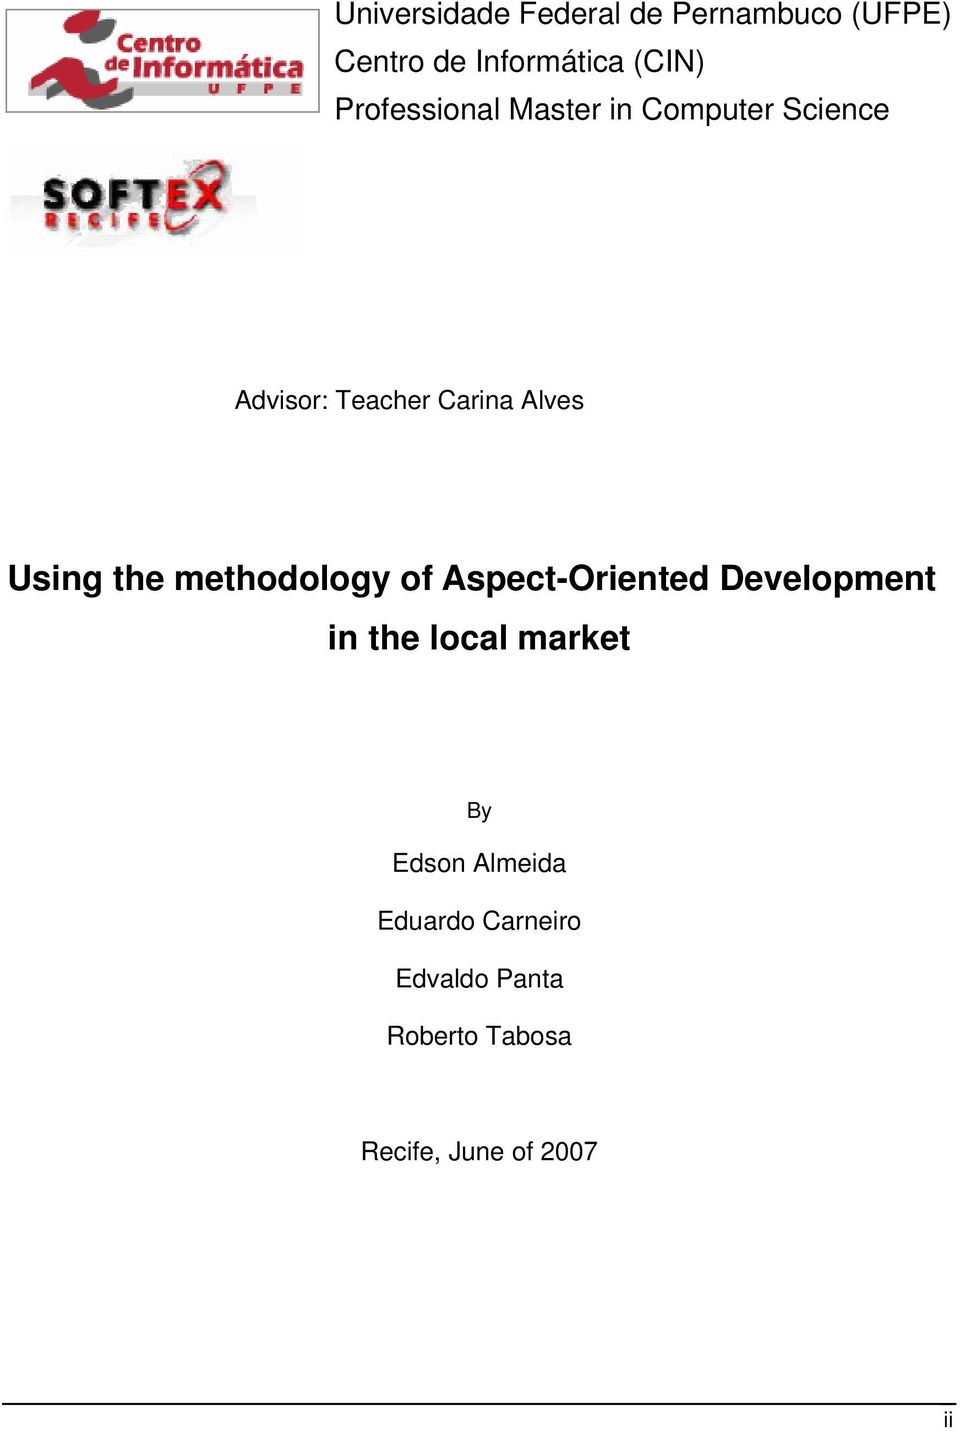 Using the methodology of Aspect-Oriented Development in the local market